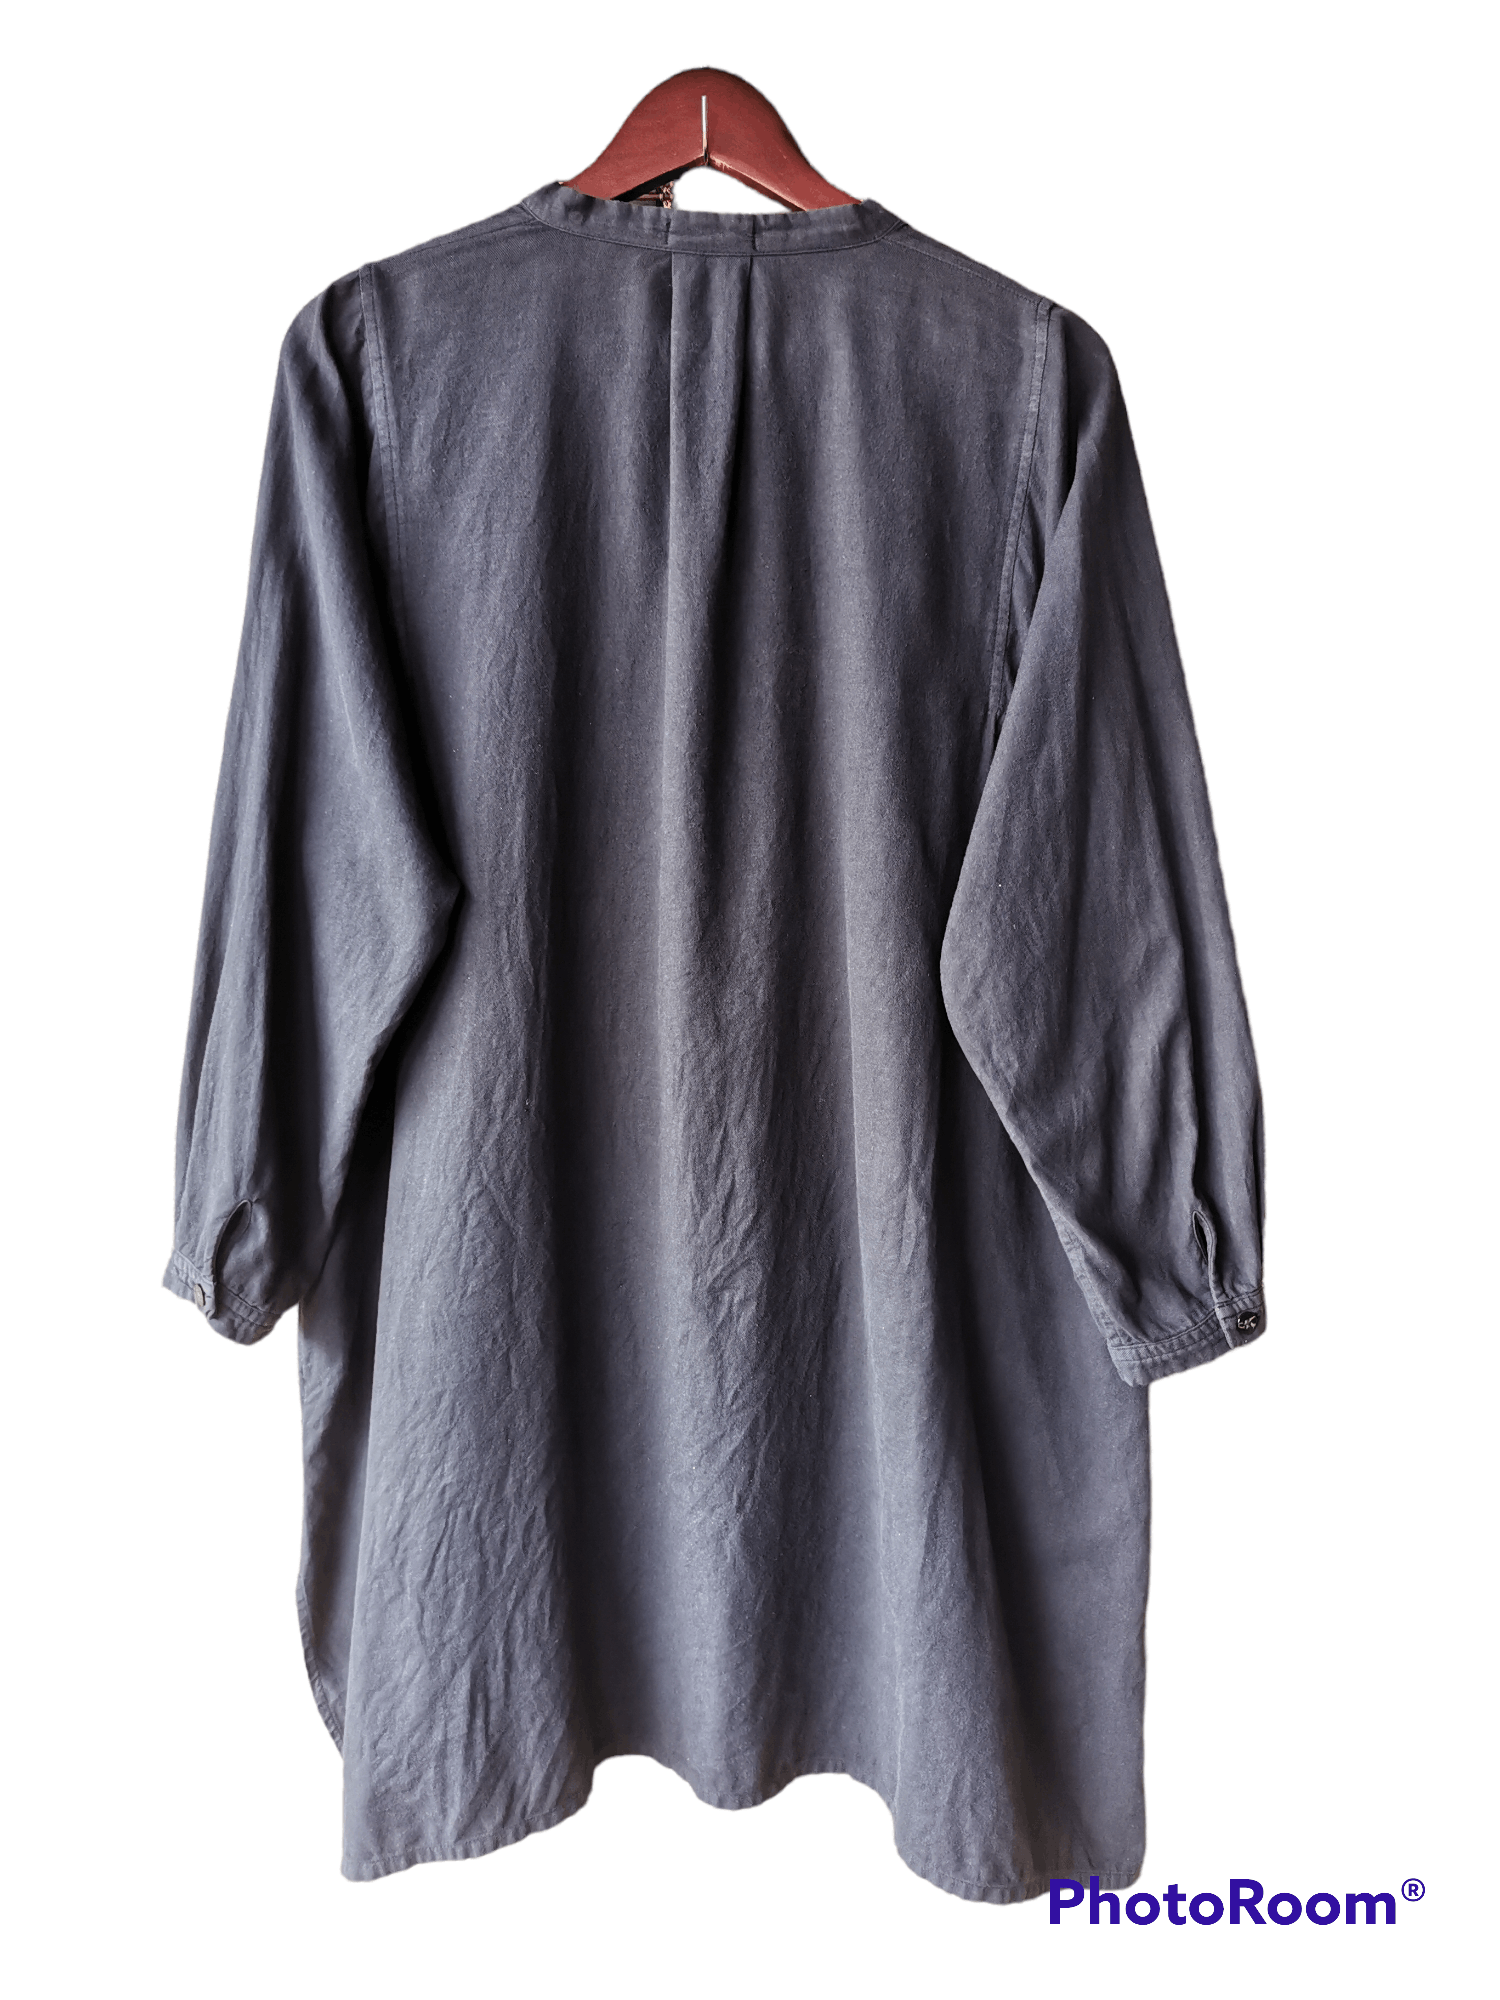 Issey Miyake Plantation by Issey Miyake Buttons Up Dress Size XS / US 0-2 / IT 36-38 - 2 Preview